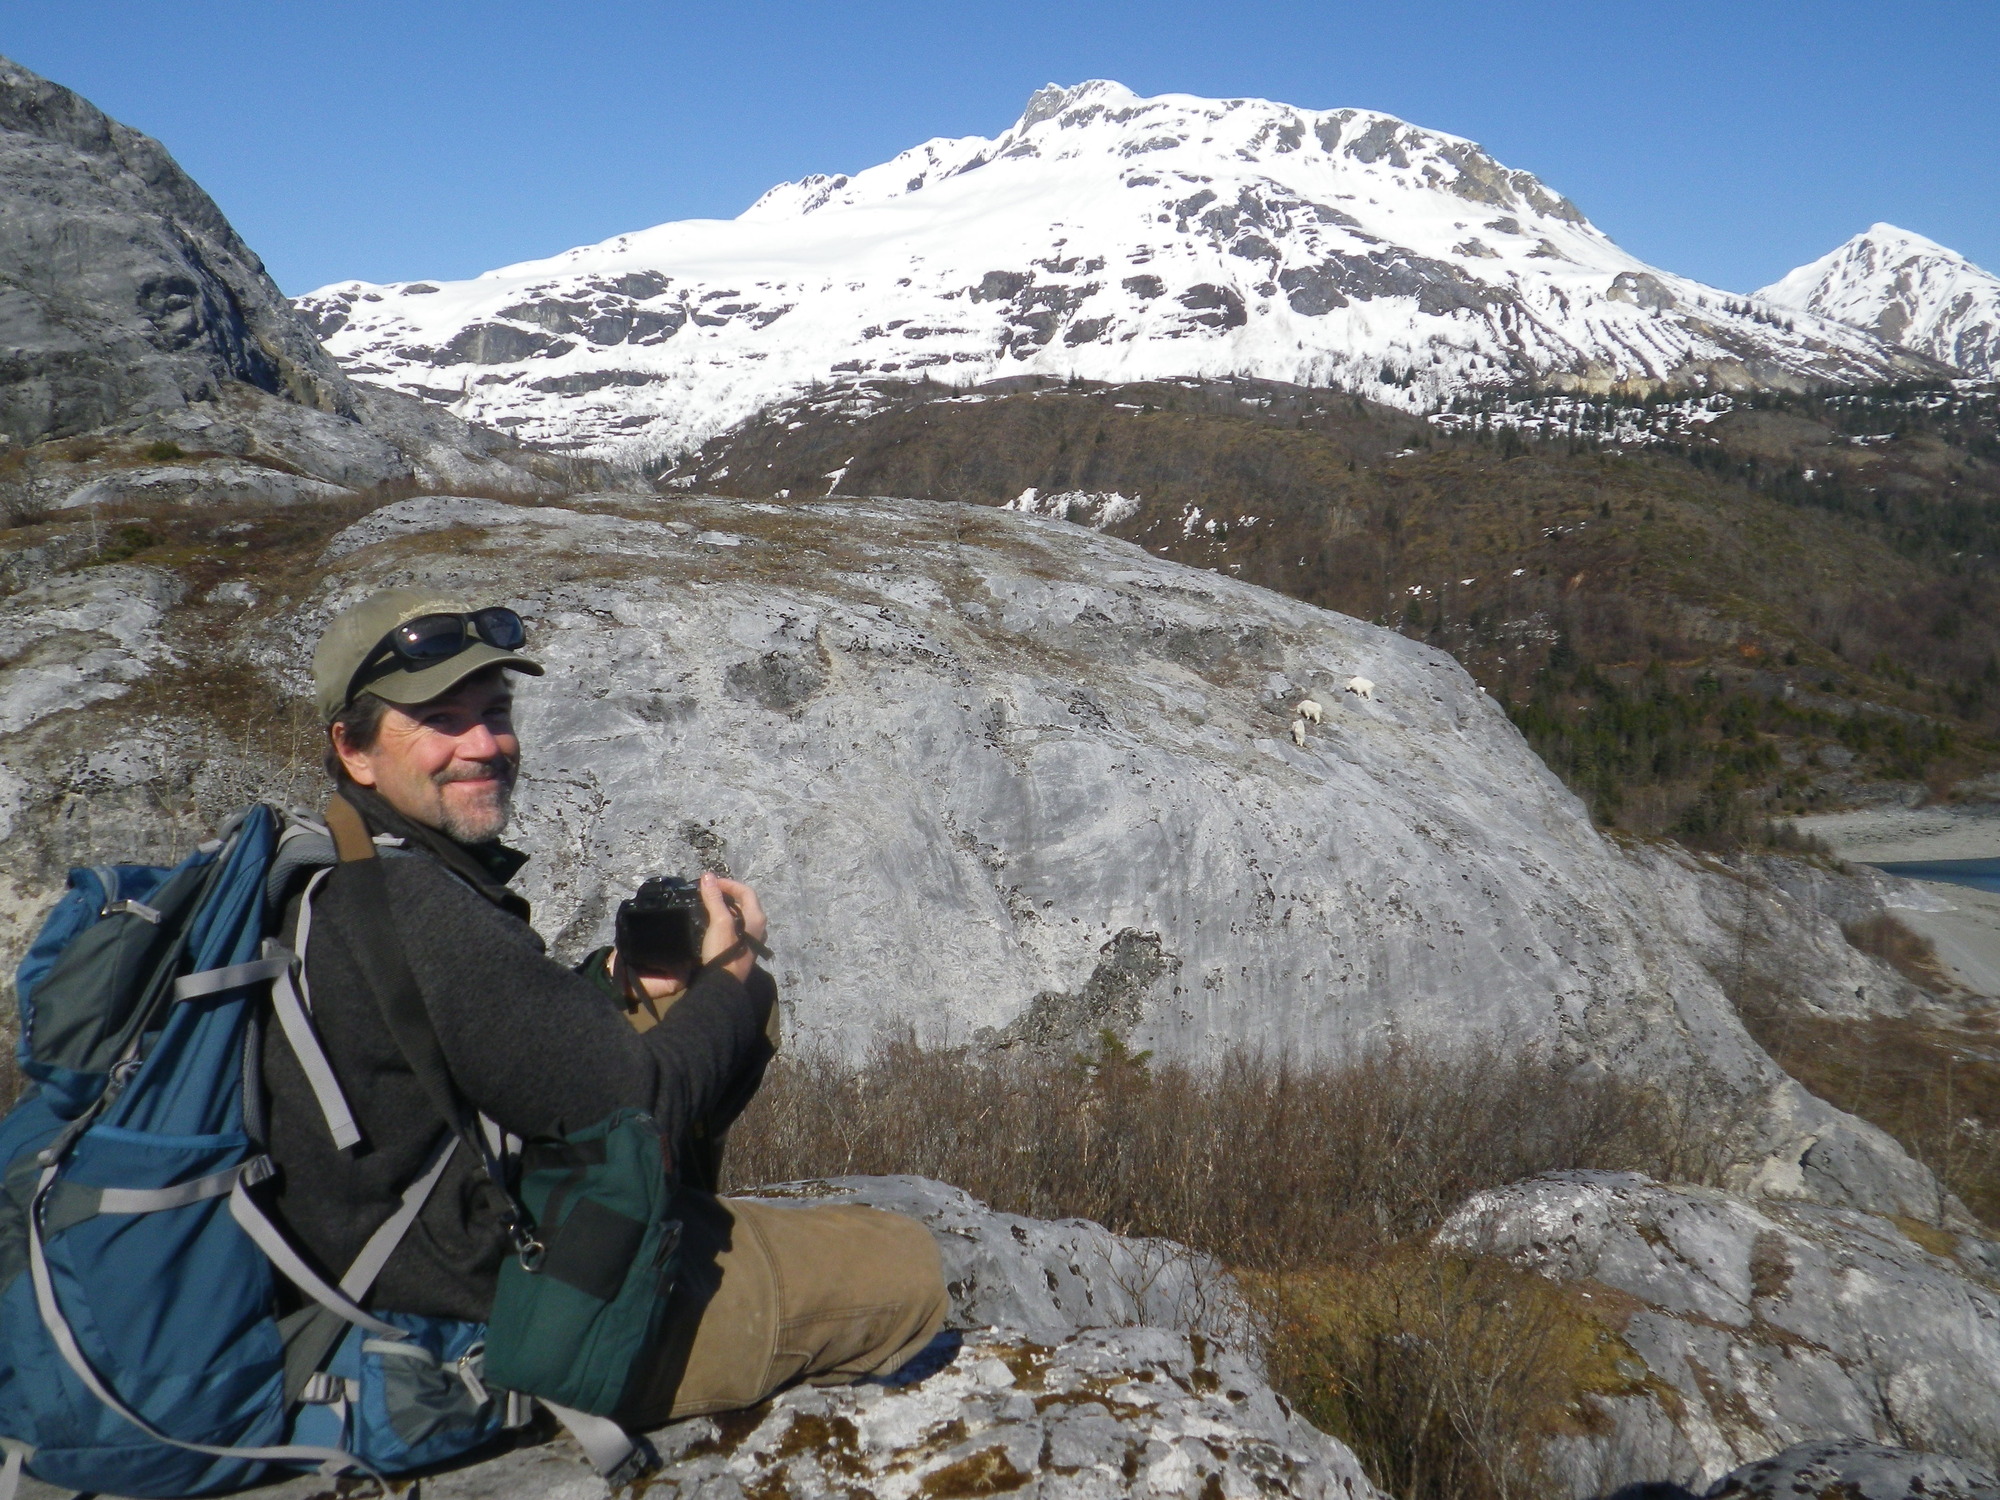 A researcher in Glacier Bay watches wildlife climbing up a rocky slope.